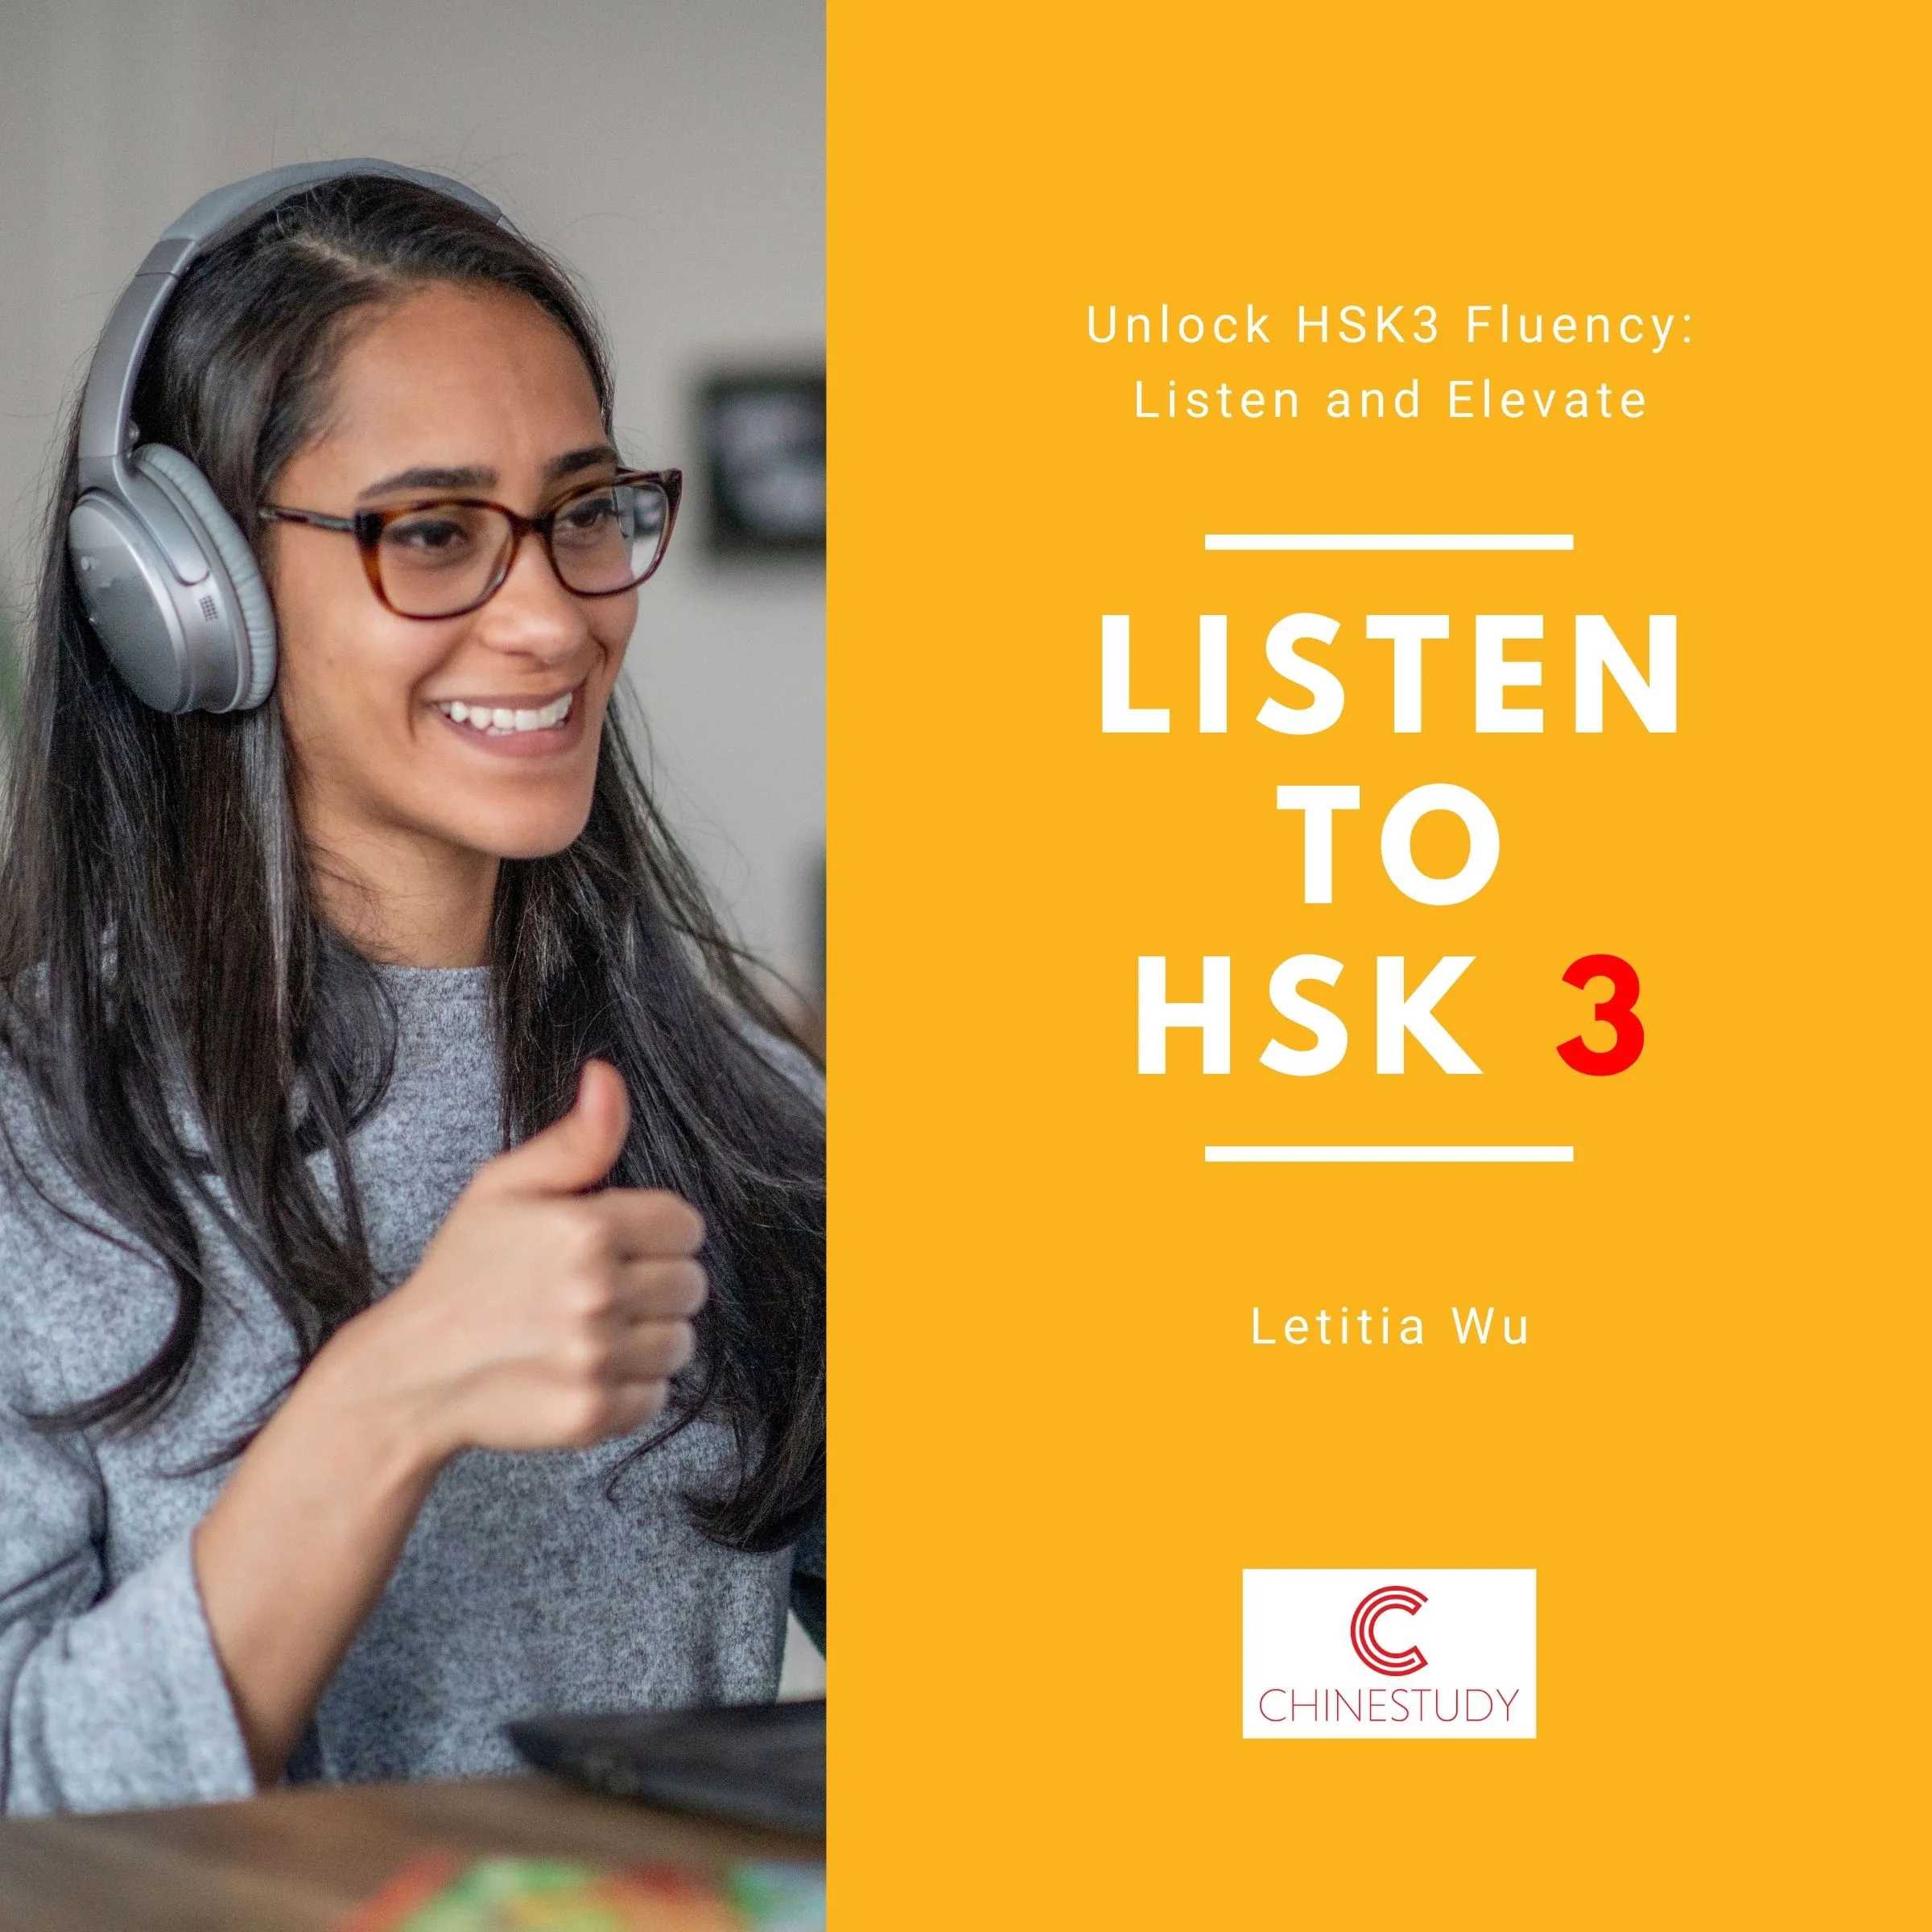 Listen to HSK3 by Letitia Wu Audiobook